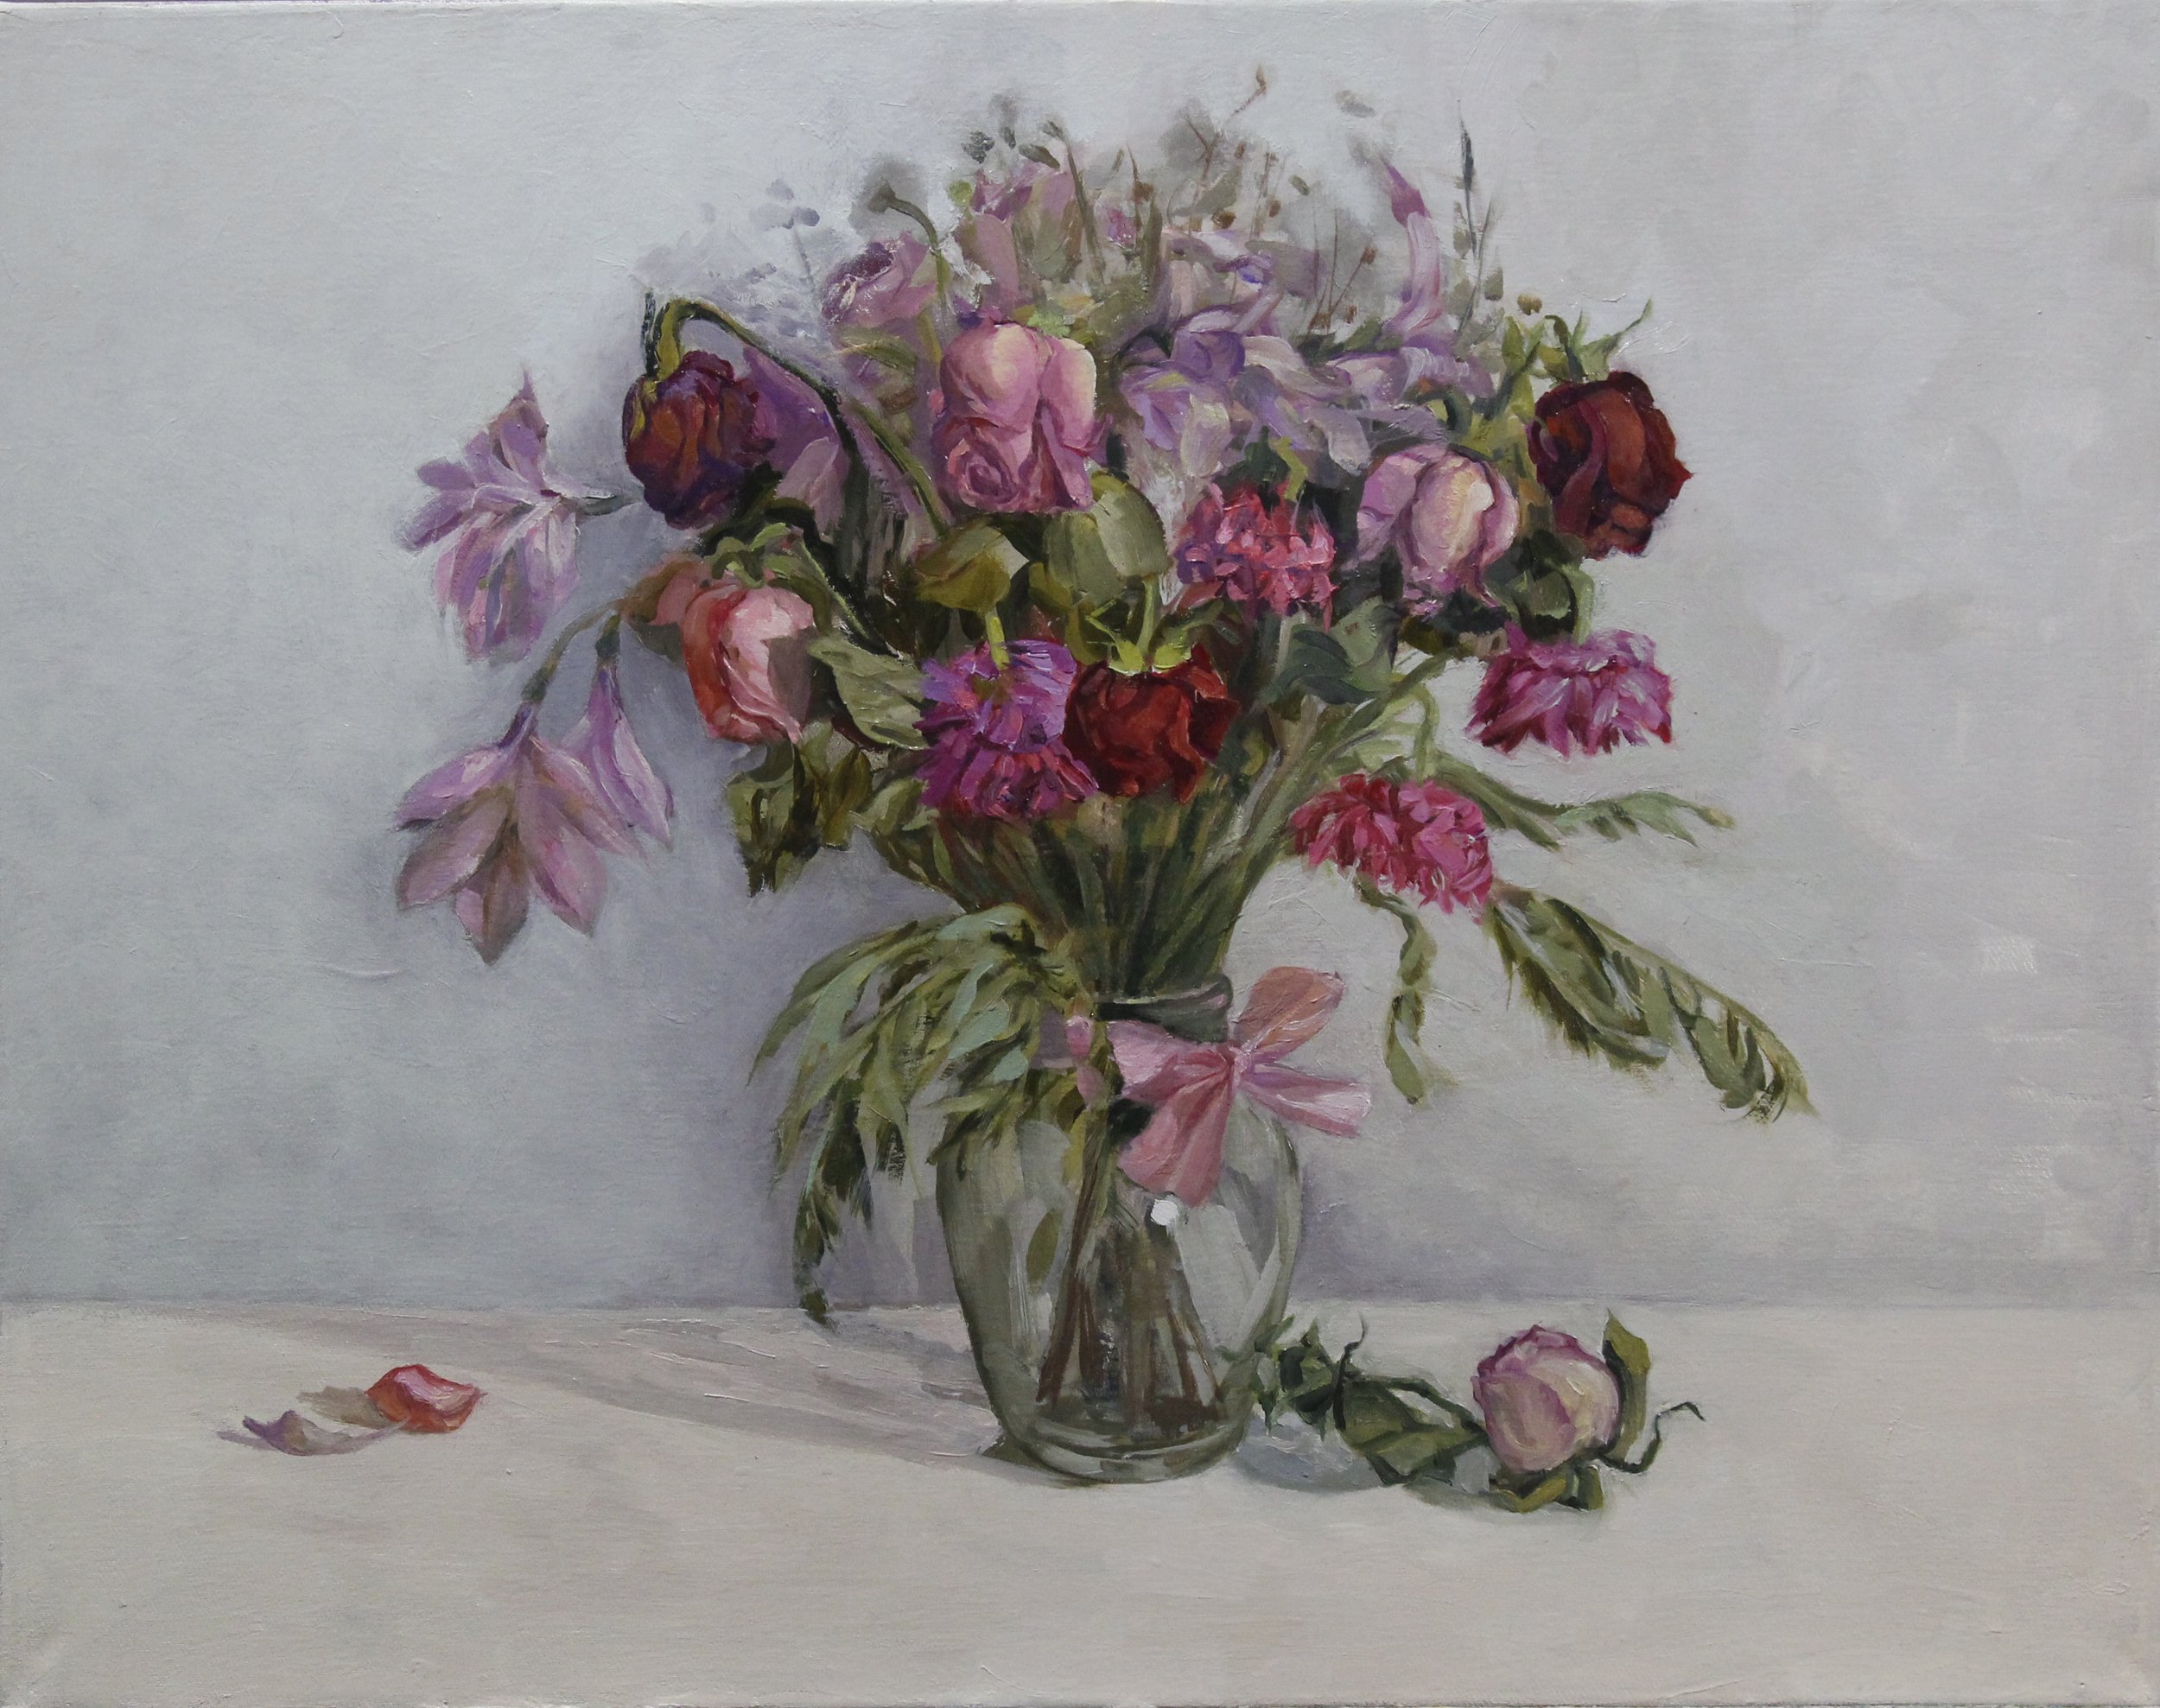 The Birthday Bouquet, 2020, Oil on linen, 22x28 inches.